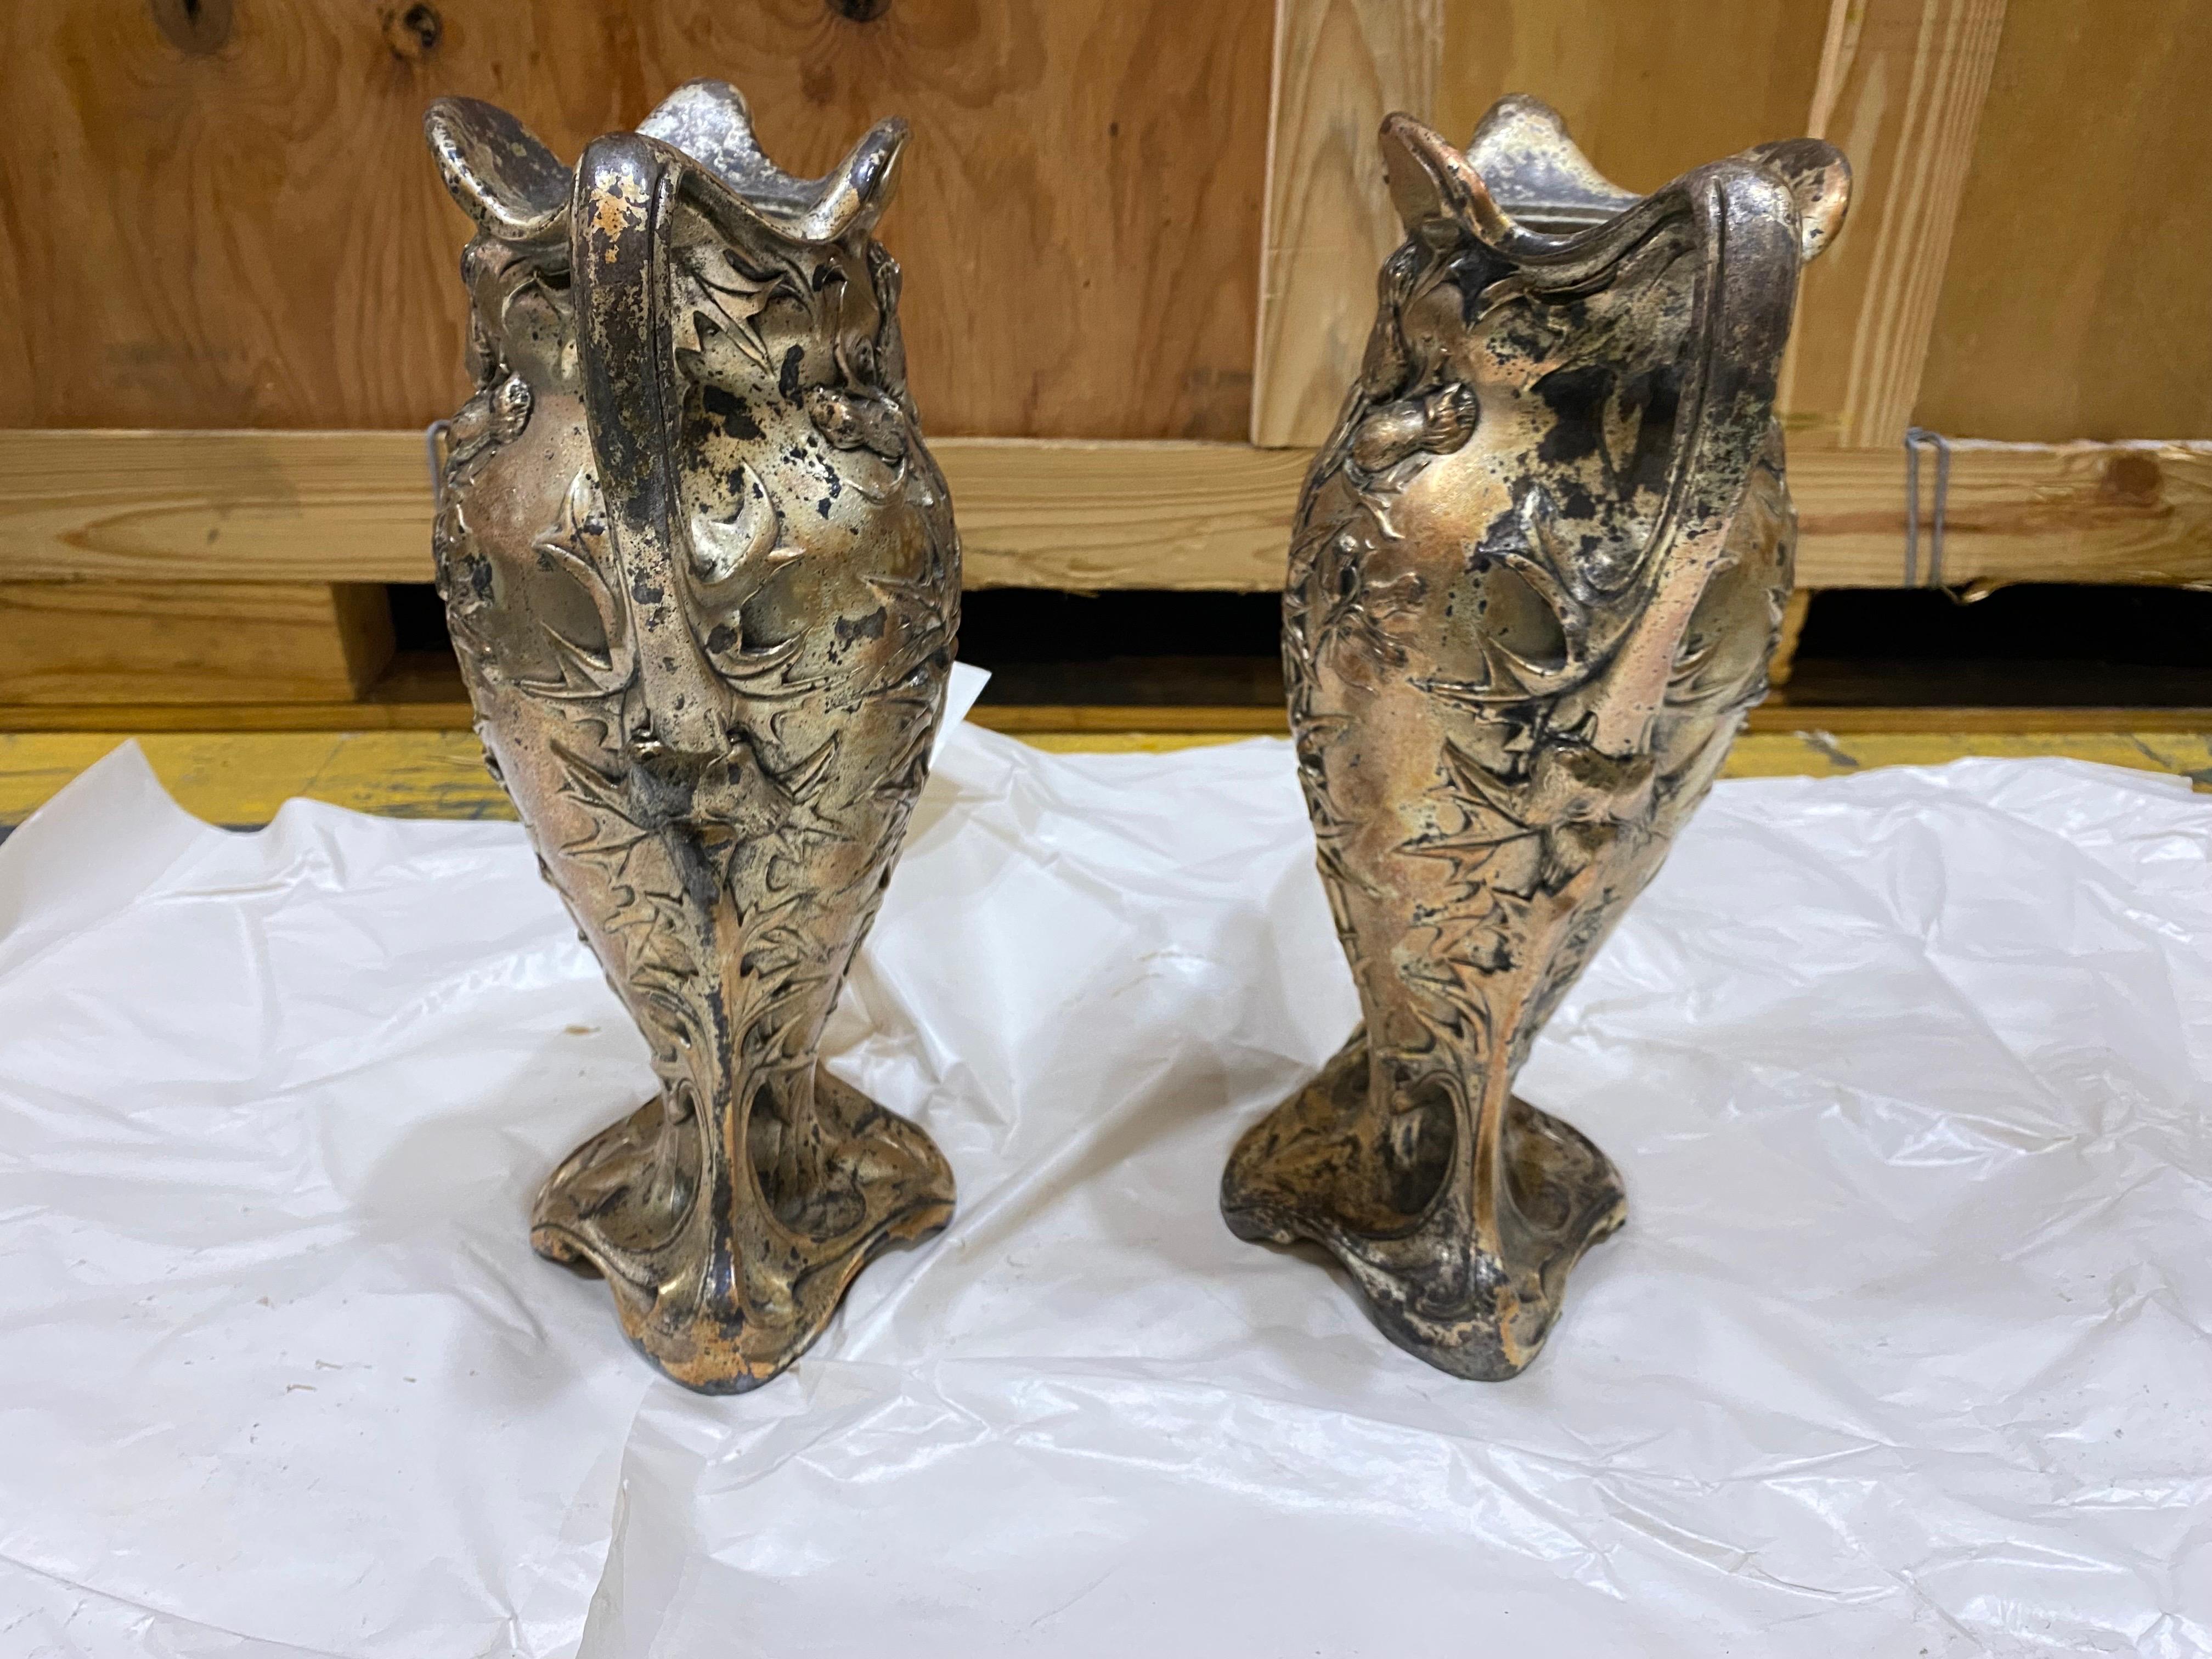 Pair of Art Nouveau Vases Iron Forged, by Dagobert Peche from the Collection of Pierre Cardin.

An exquisite pair of classic Art Nouveau vases made in forged iron and silver painted, as was the style at the time, by Dagobert Peche, an Austrian